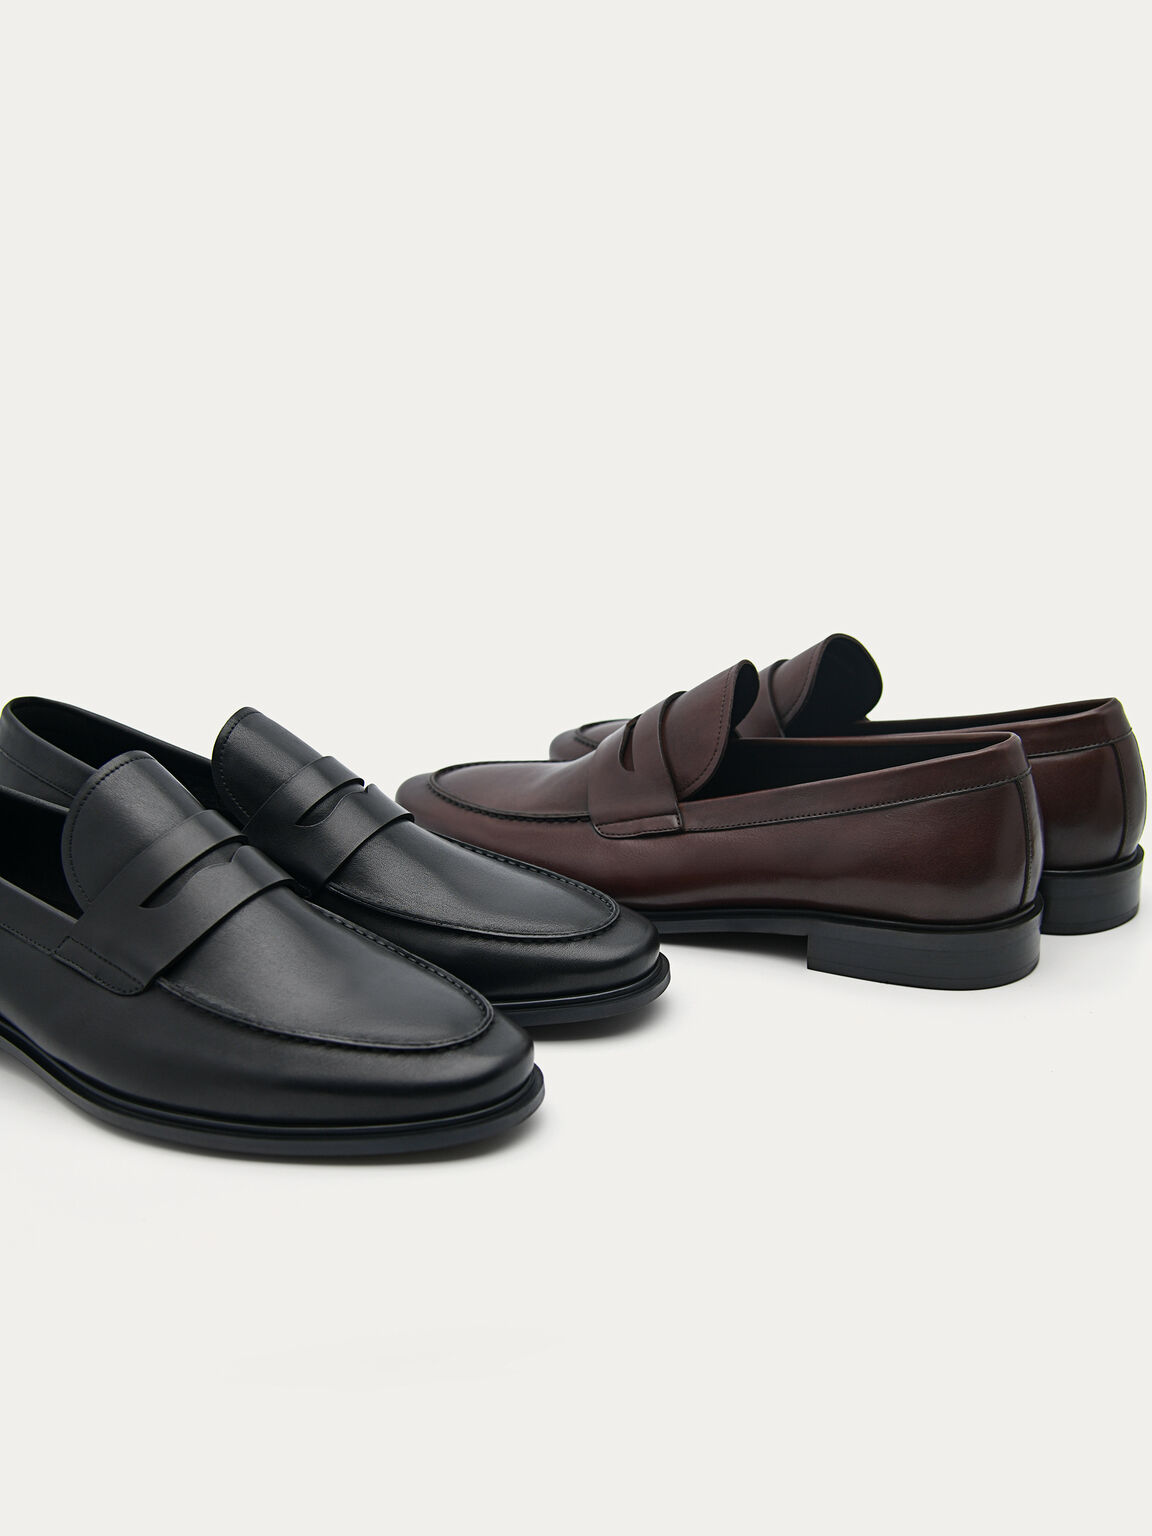 Bailey Calf Leather Loafers, Dark Brown, hi-res